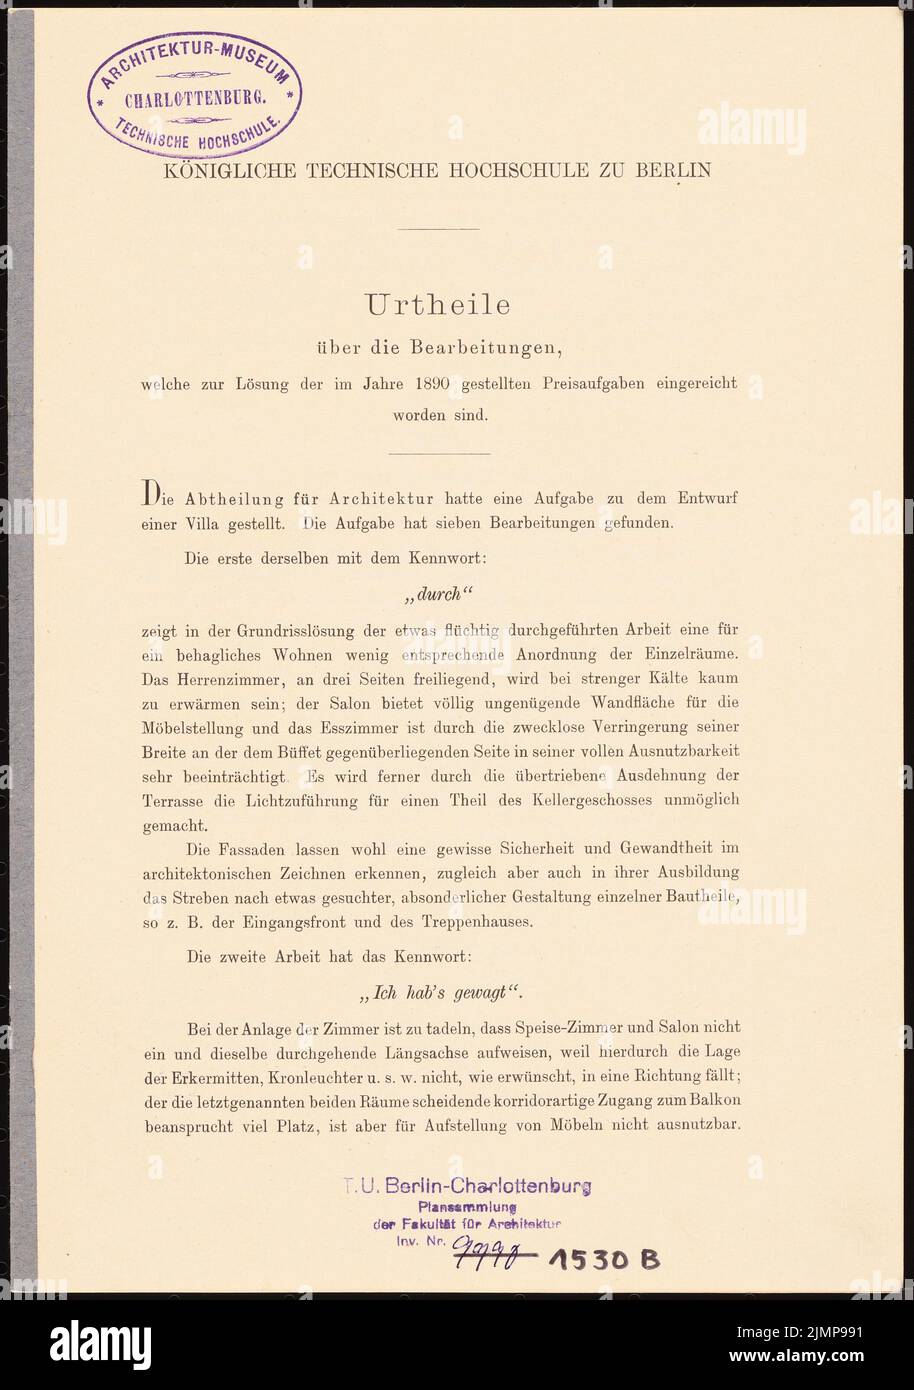 Goebel Erich (died 1867), Villa (1890-1890): judgments of the KTH in Berlin on the processing of the price tasks, 15 p Goebel Erich  (geb. 1867): Villa Stock Photo